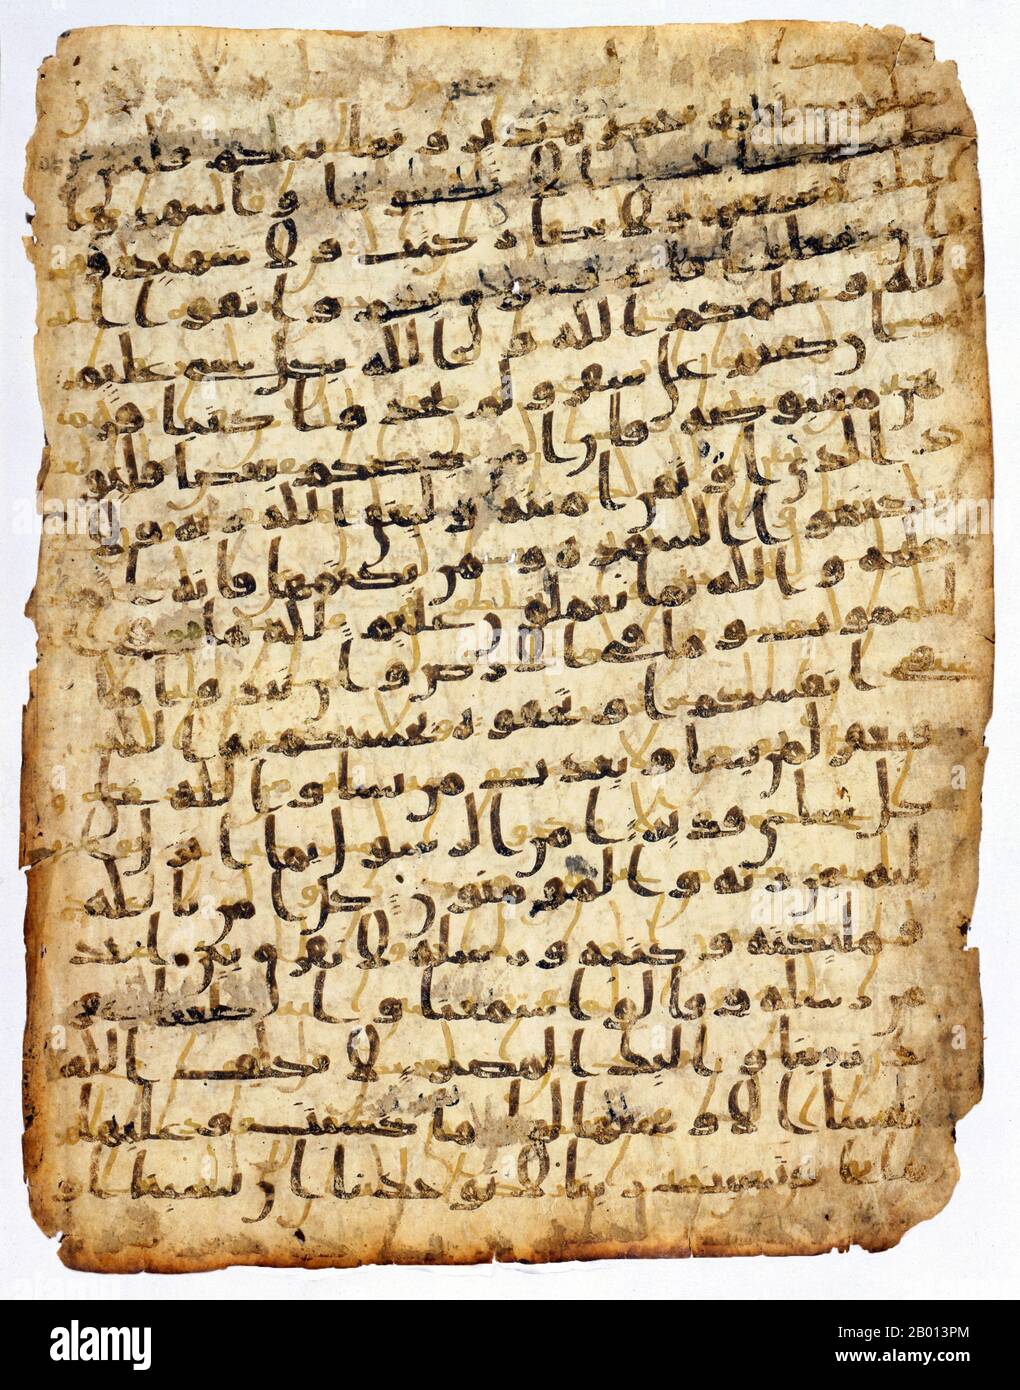 Arabia/Syria: Page from a very early Qur'an. Hijaz, 7th century. Sura 'The Cow', written in Hijazi script. It is a palimpsest. Stock Photo